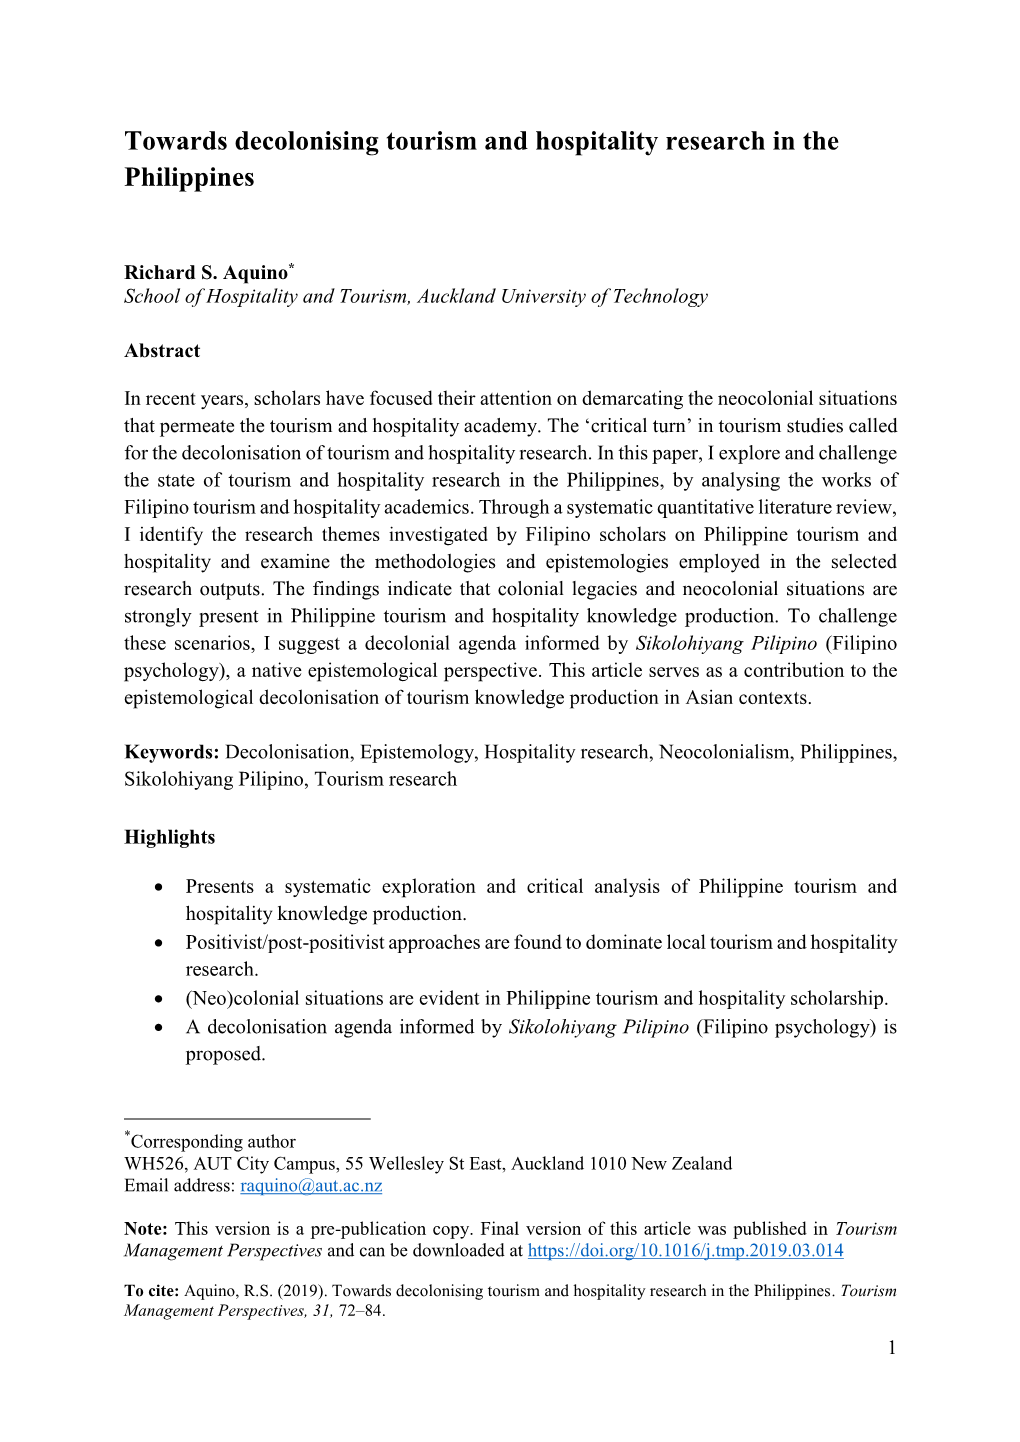 Towards Decolonising Tourism and Hospitality Research in the Philippines